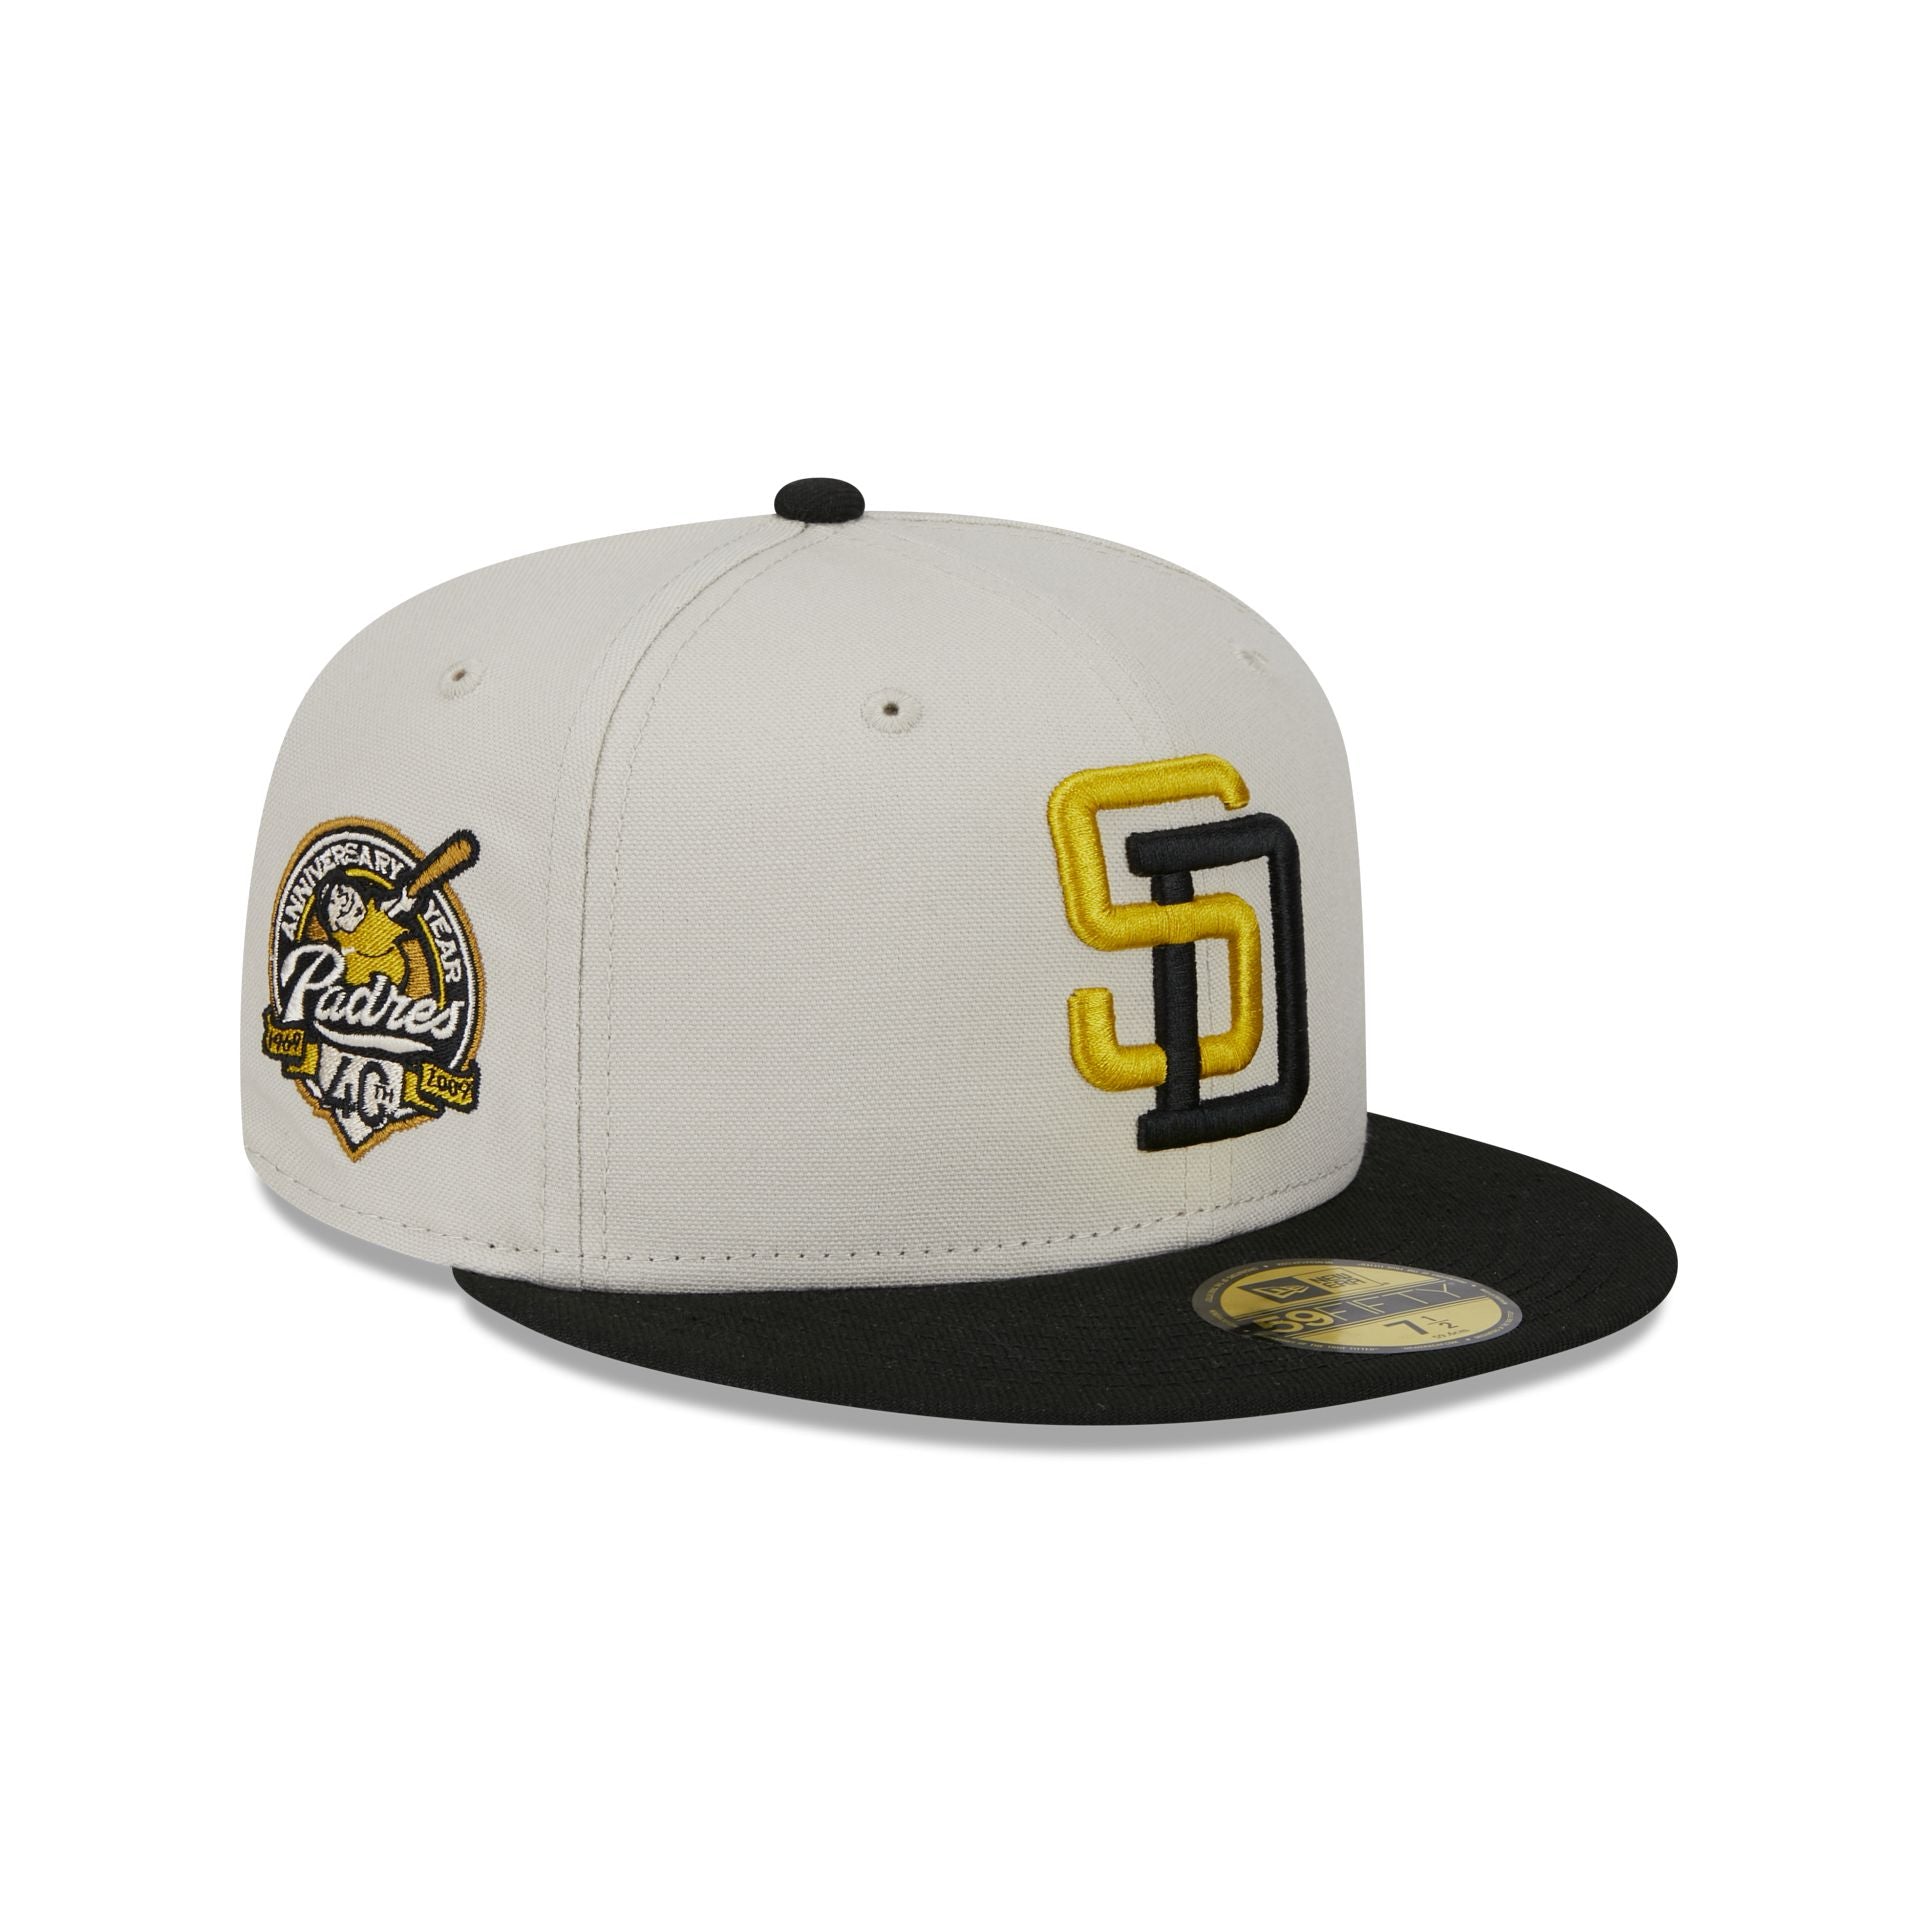 Fitted Stone Two Padres Cap 59FIFTY New Diego – Era San Tone